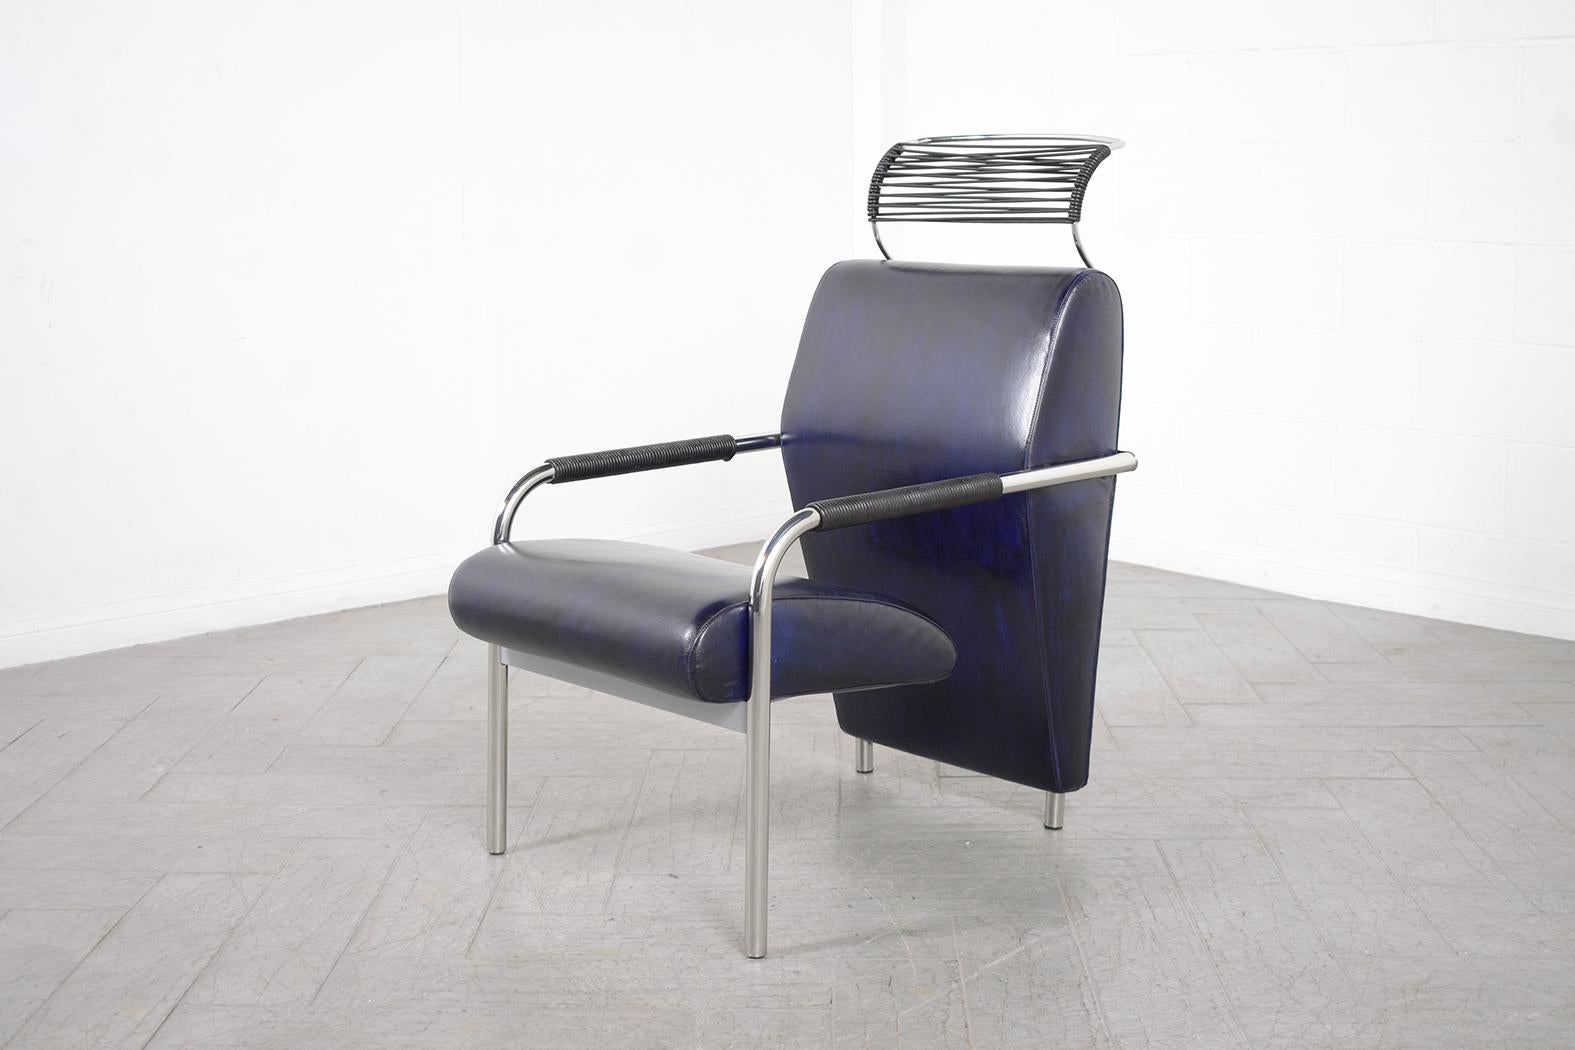 Late 20th Century Vintage Italian Mid-Century Leather Blue Lounge Chair & Ottoman by Andrea Branzi